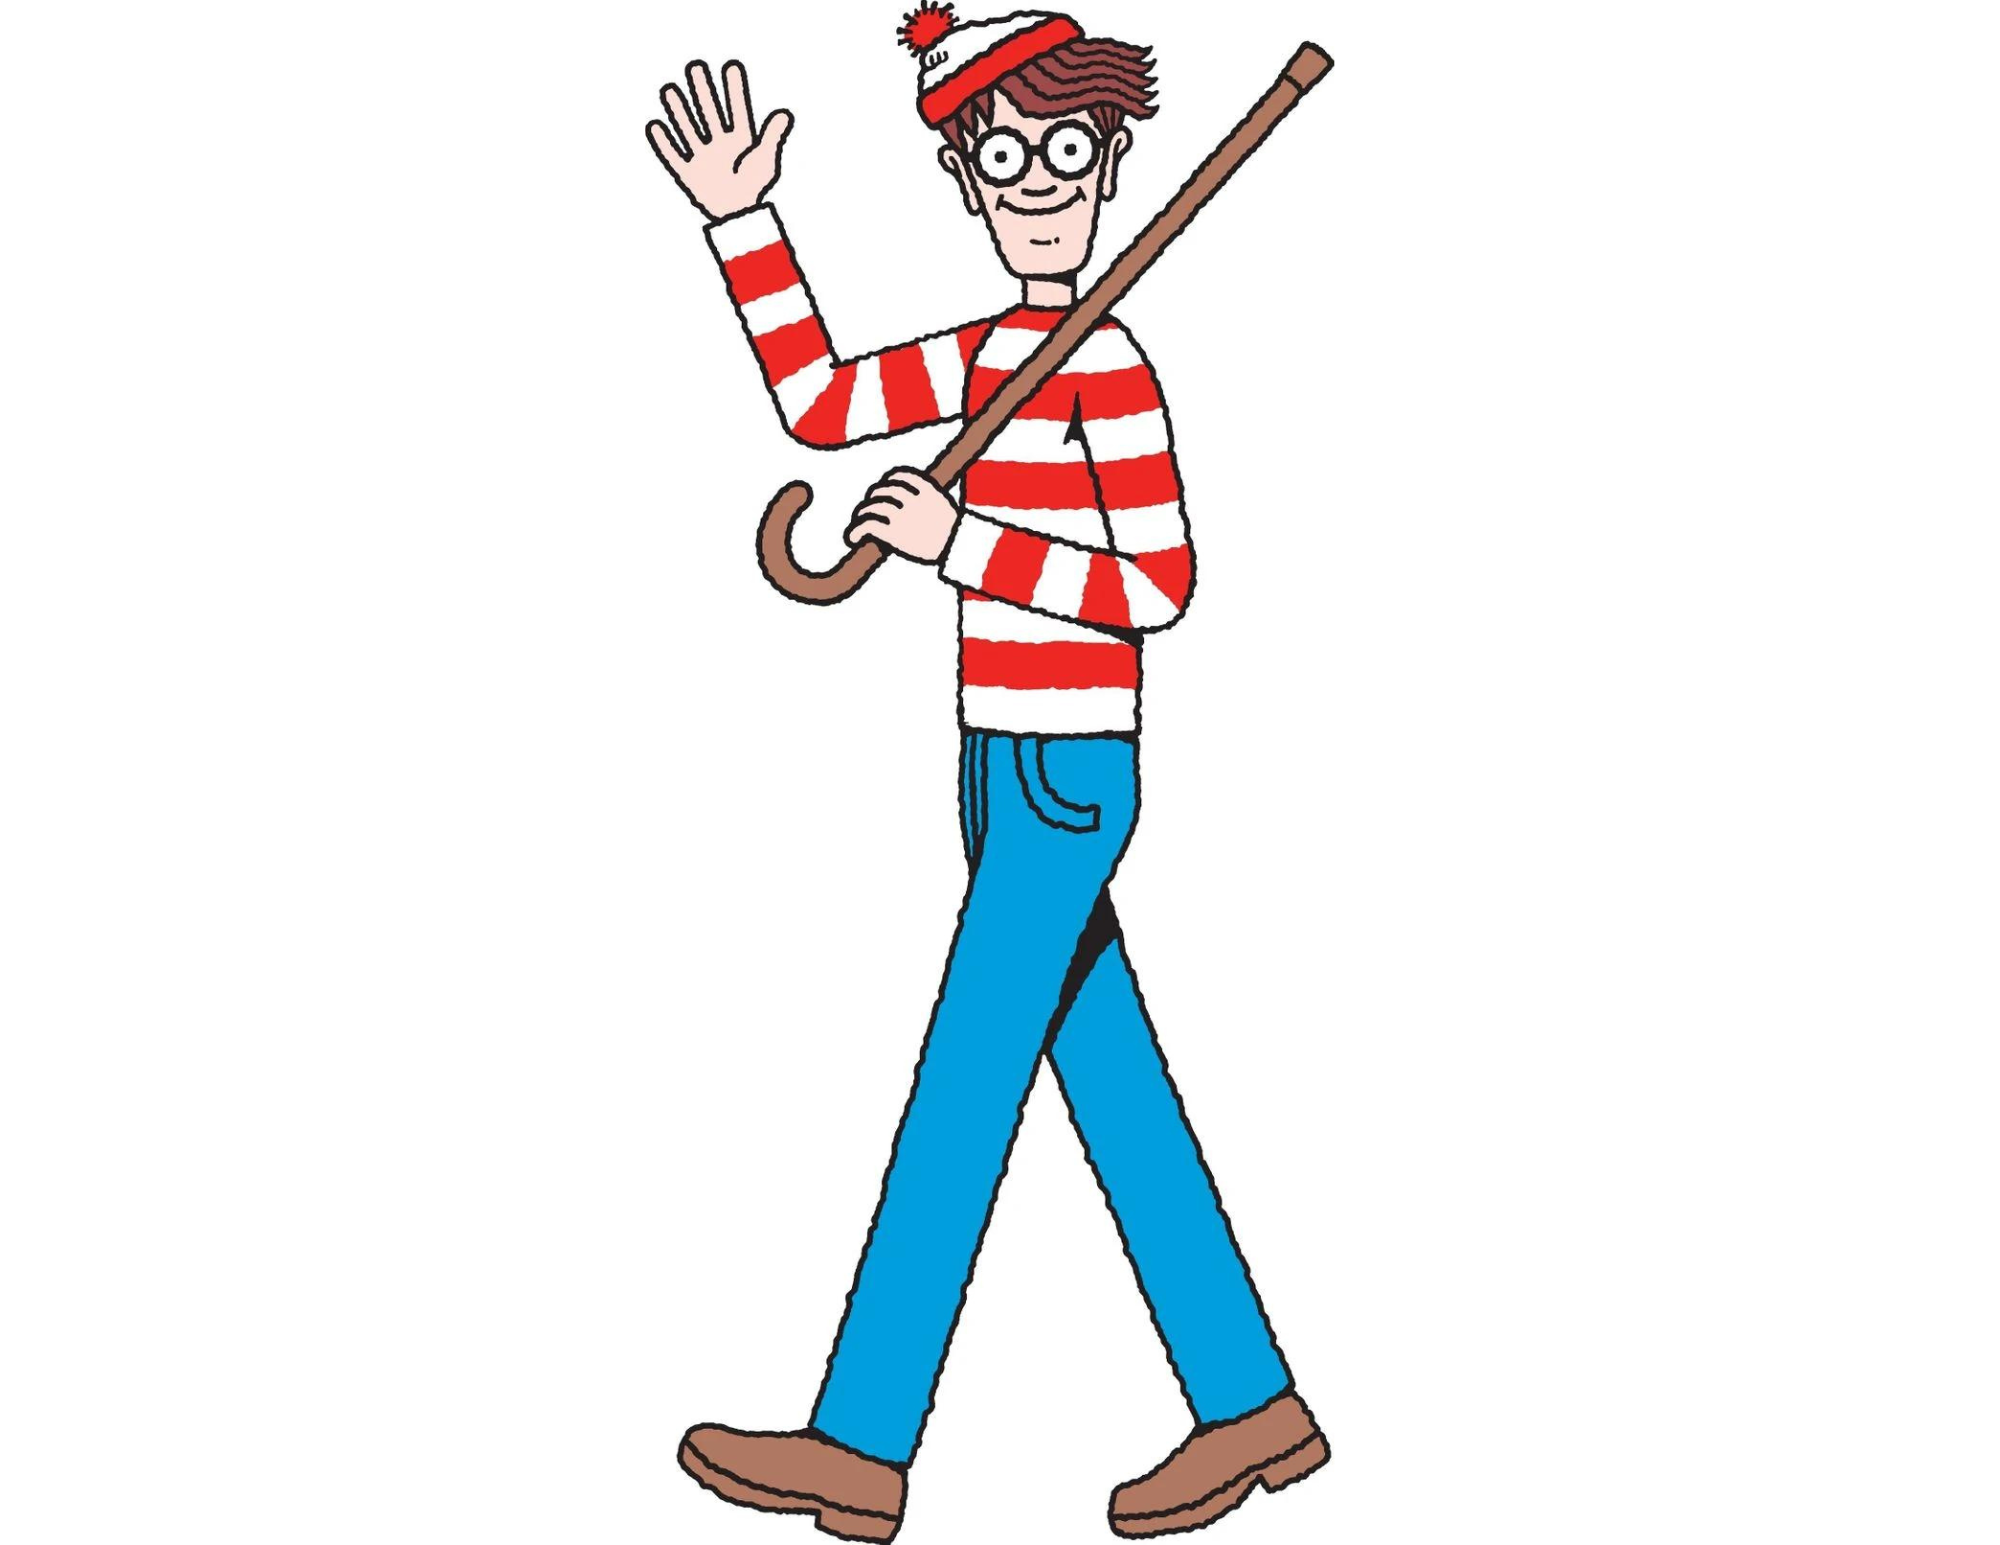 for the entire month of march Help us find Waldo & friends hidden somewhere inside the library & get entered into a raffle. winner will be contacted at the end of the month.